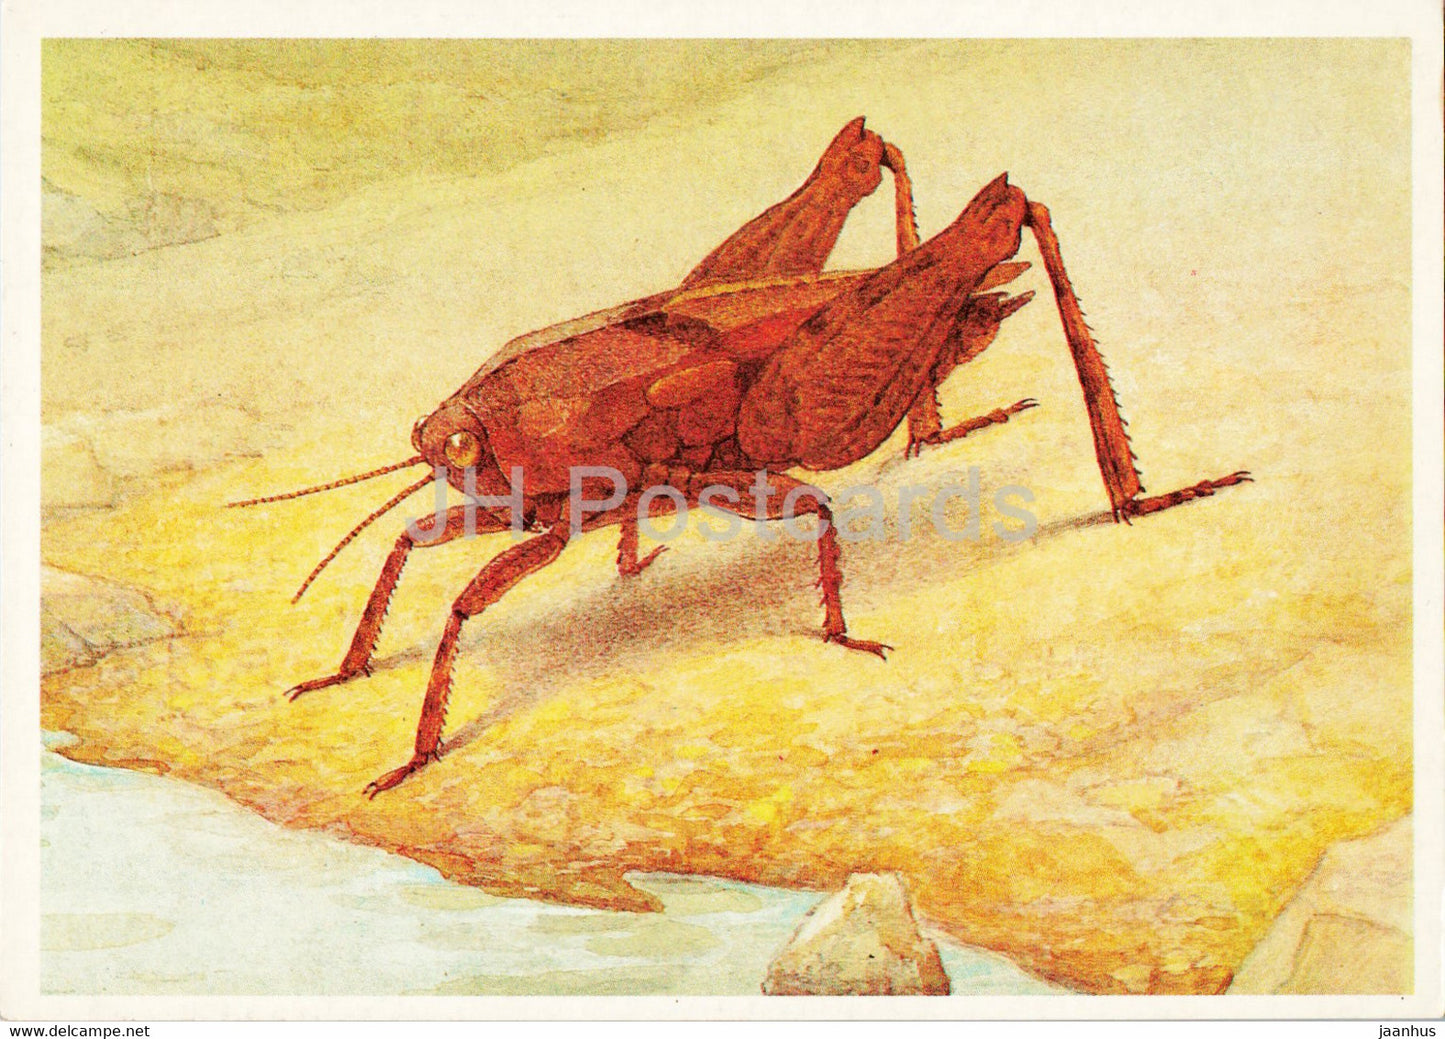 Tetrix bipunctata - Two Spotted grasshopper - Insects - illustration - 1990 - Russia USSR - unused - JH Postcards